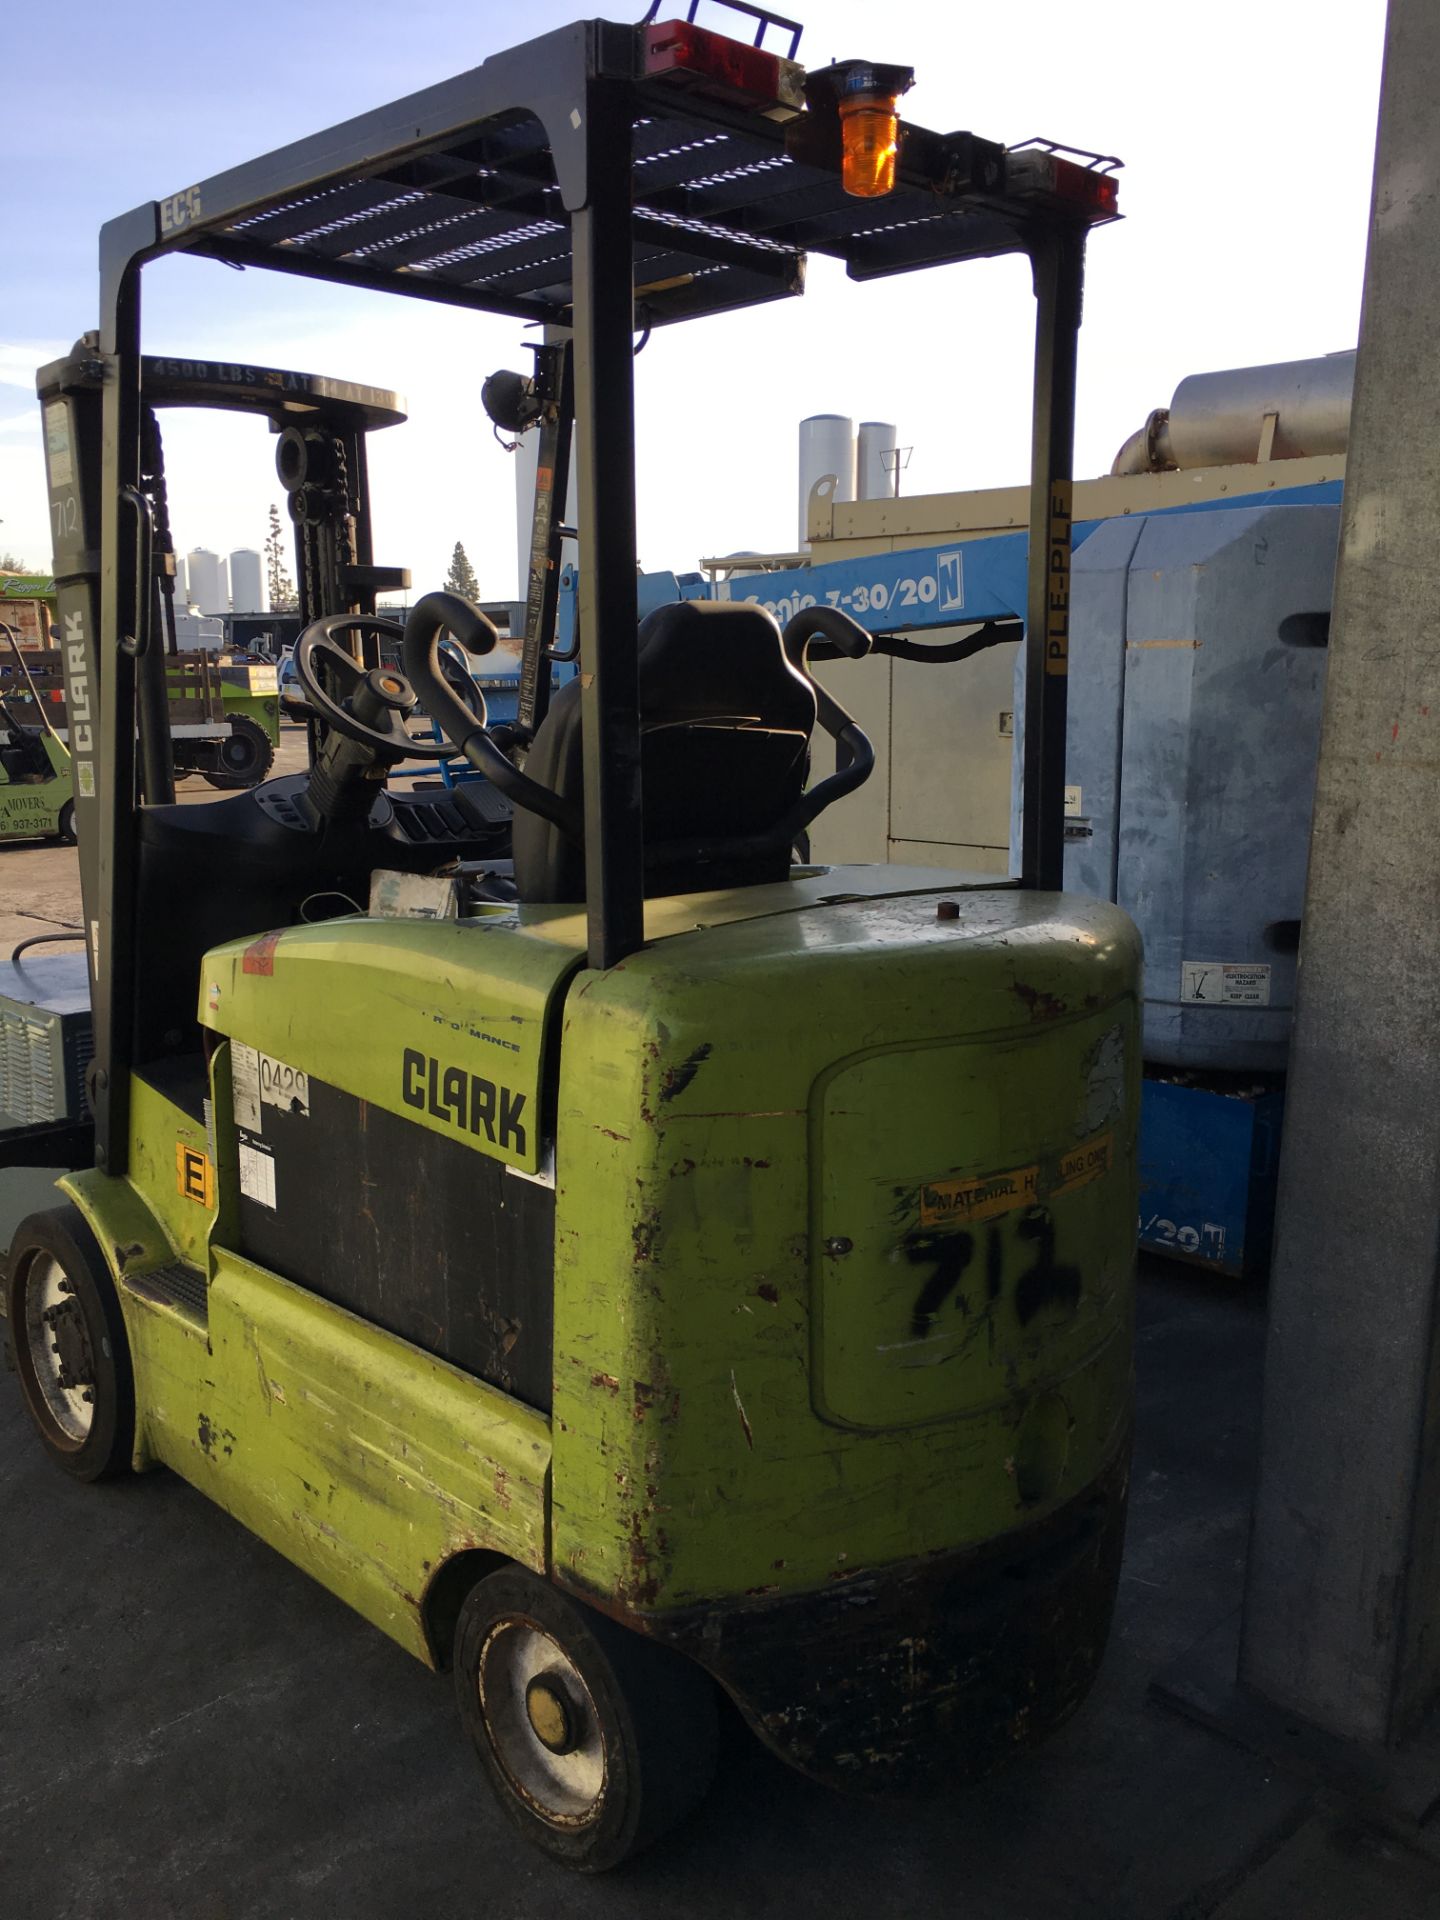 CLARK 4500 LB CAPACITY ELECTRIC FORKLIFT WITH BATTERY CHARGER Loading Fee: 100 - Image 2 of 9